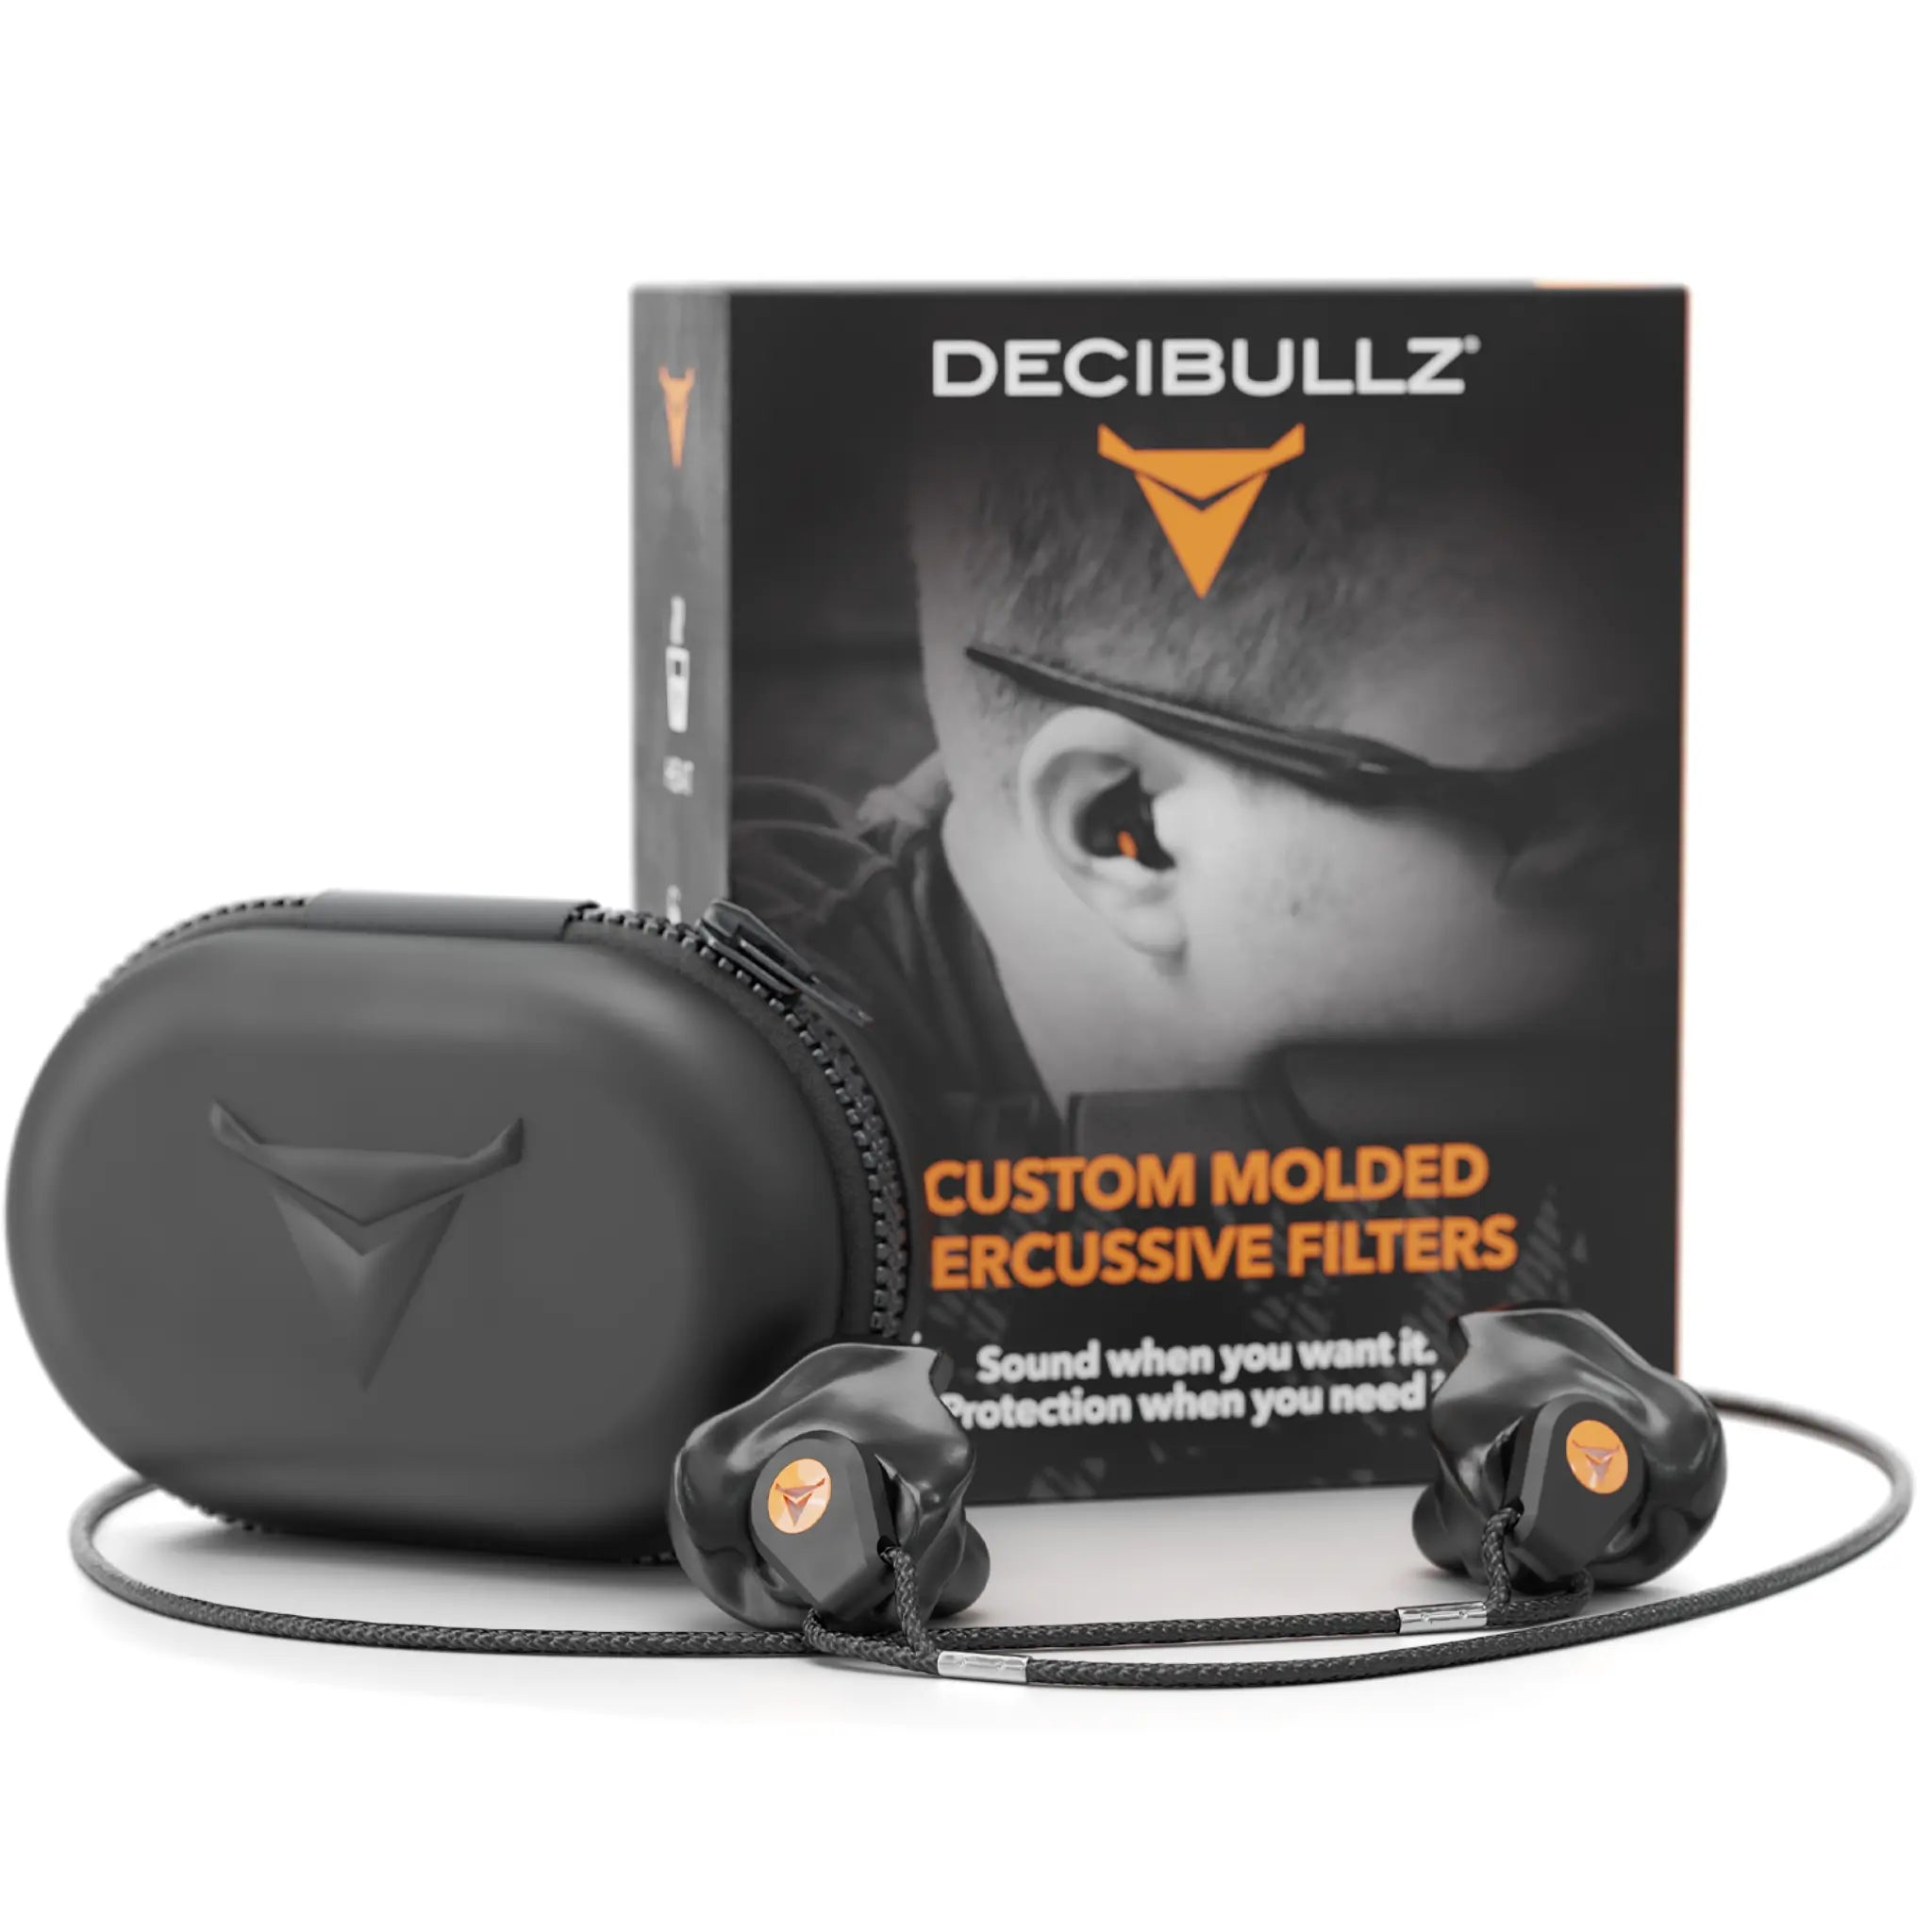 A product image of Decibullz Custom Molded Percussive Shooting Filter Earplugs. The image shows the earplugs, a carrying case, and the packaging box. The box features an image of a person wearing the earplugs and highlights protection and sound control through advanced percussive filter technology.